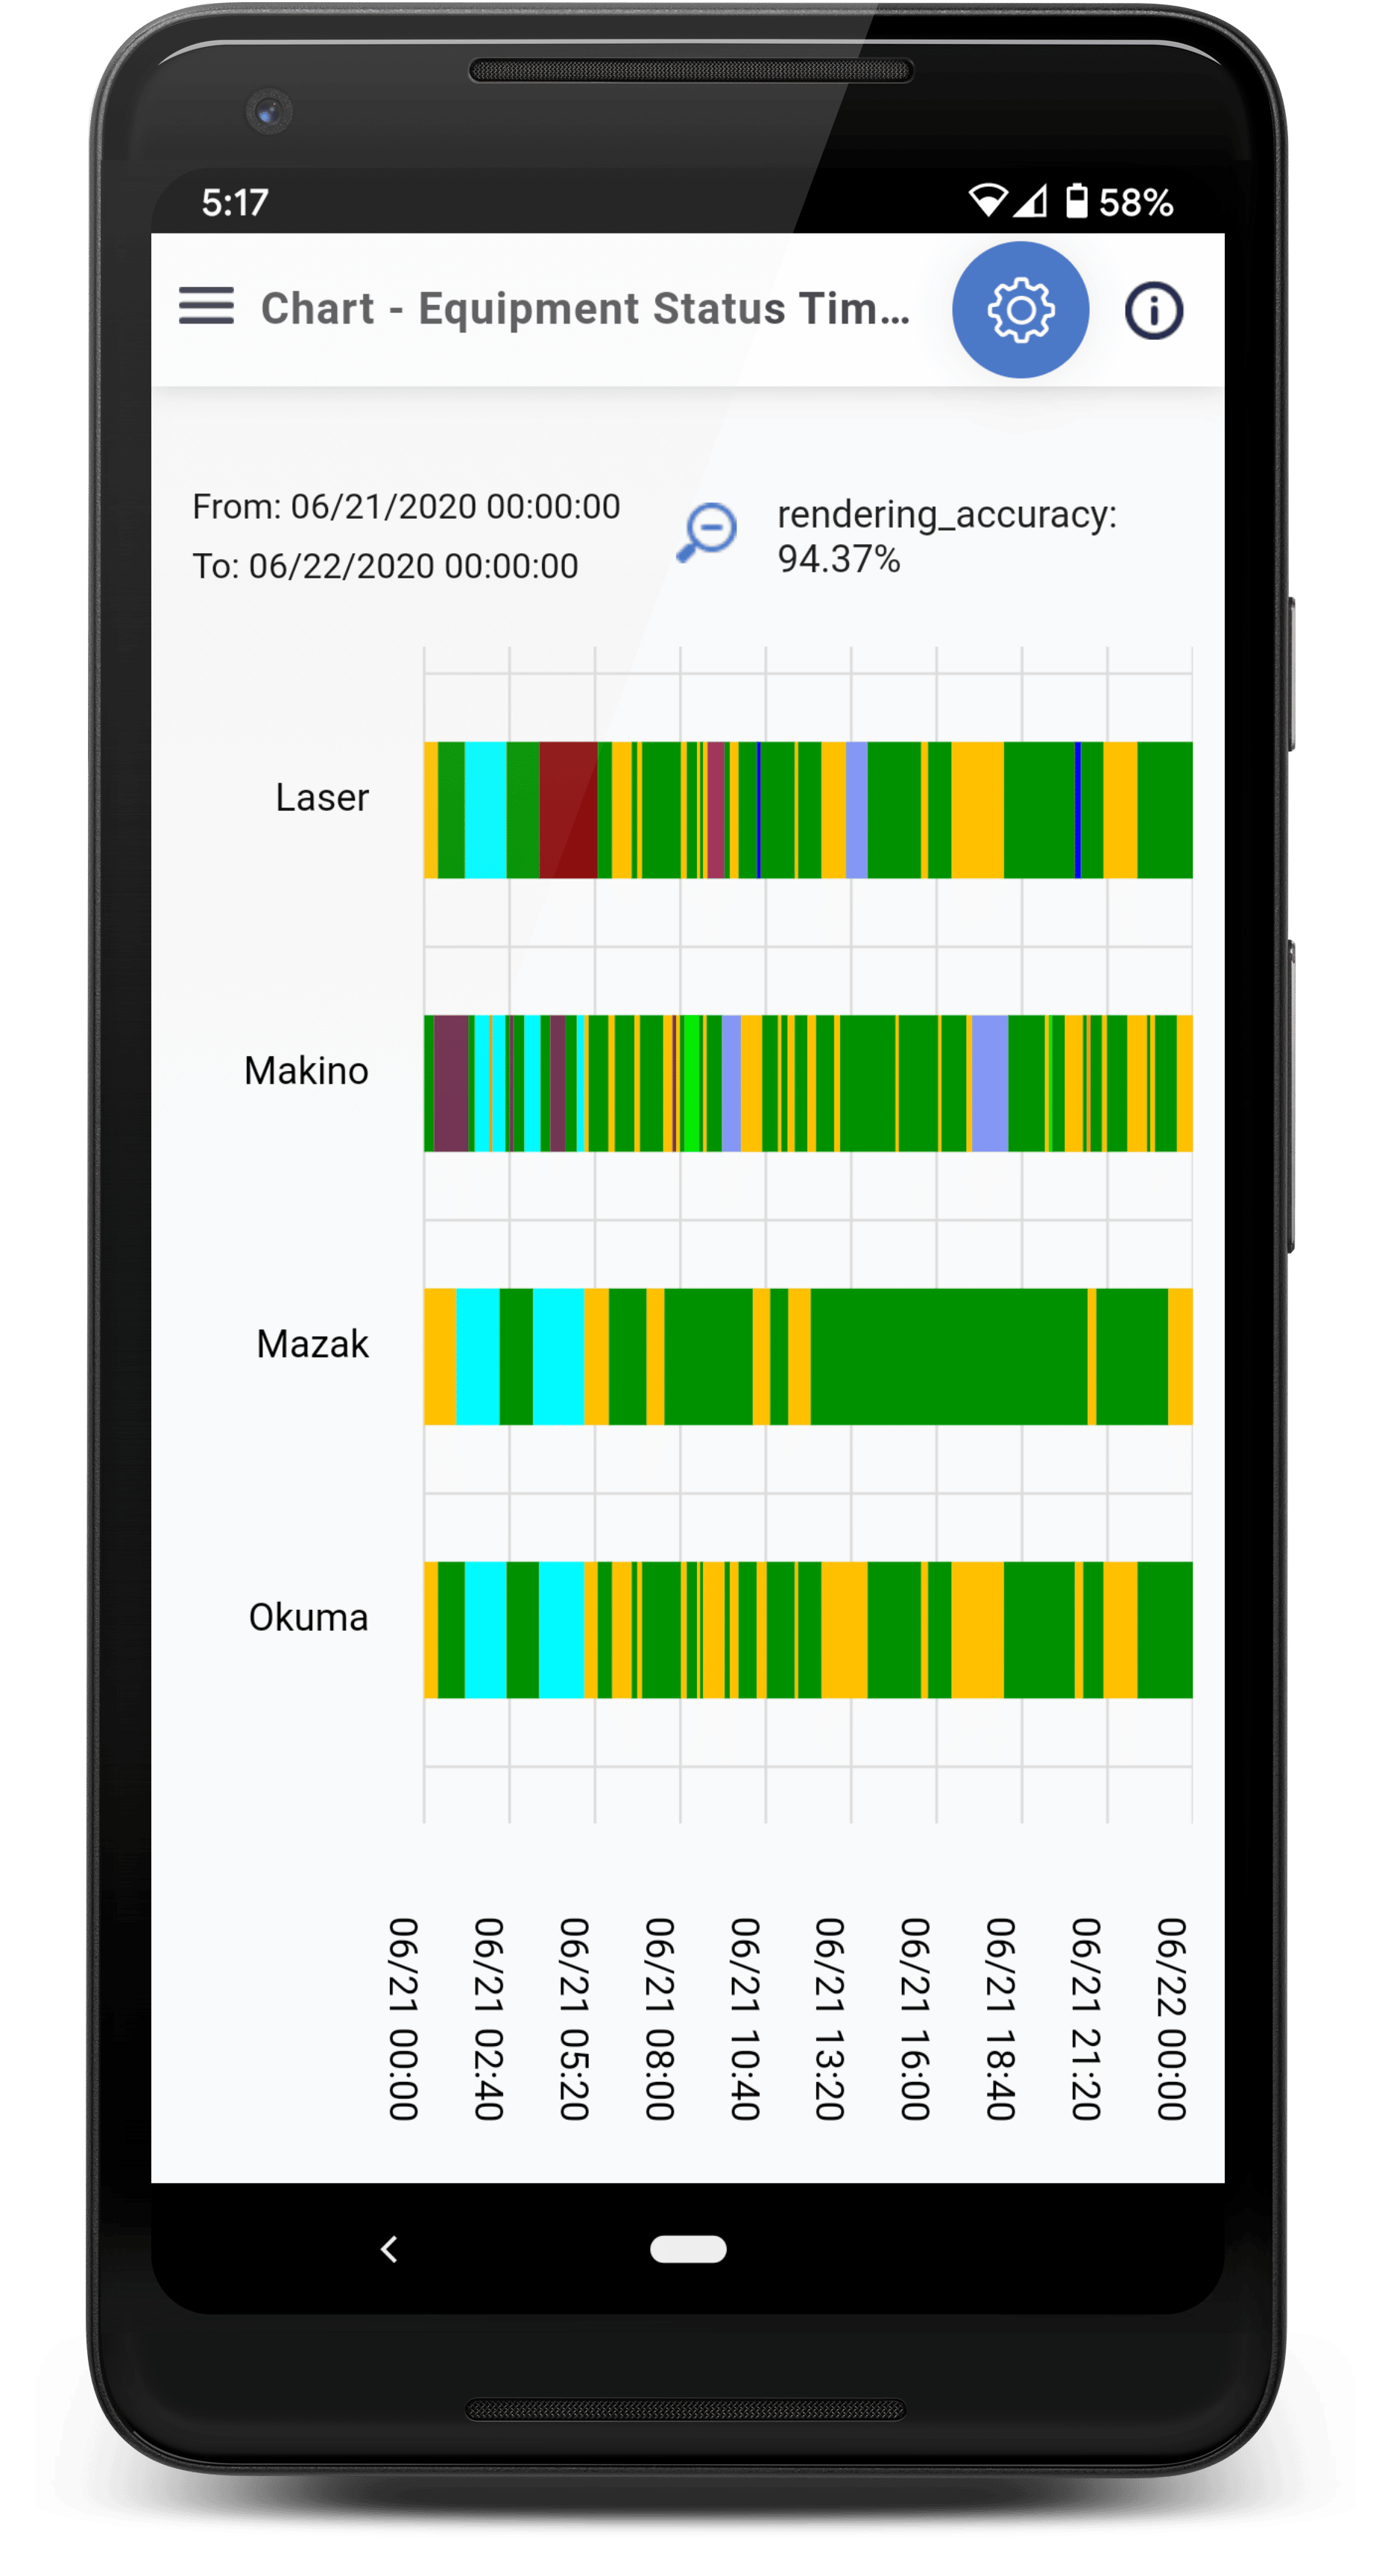 A smartphone displaying the Equipment Status Timeline screen on DataXchange's mobile machine monitoring app. The horiziontal chart shows the status of 4 different machines throughout the day.